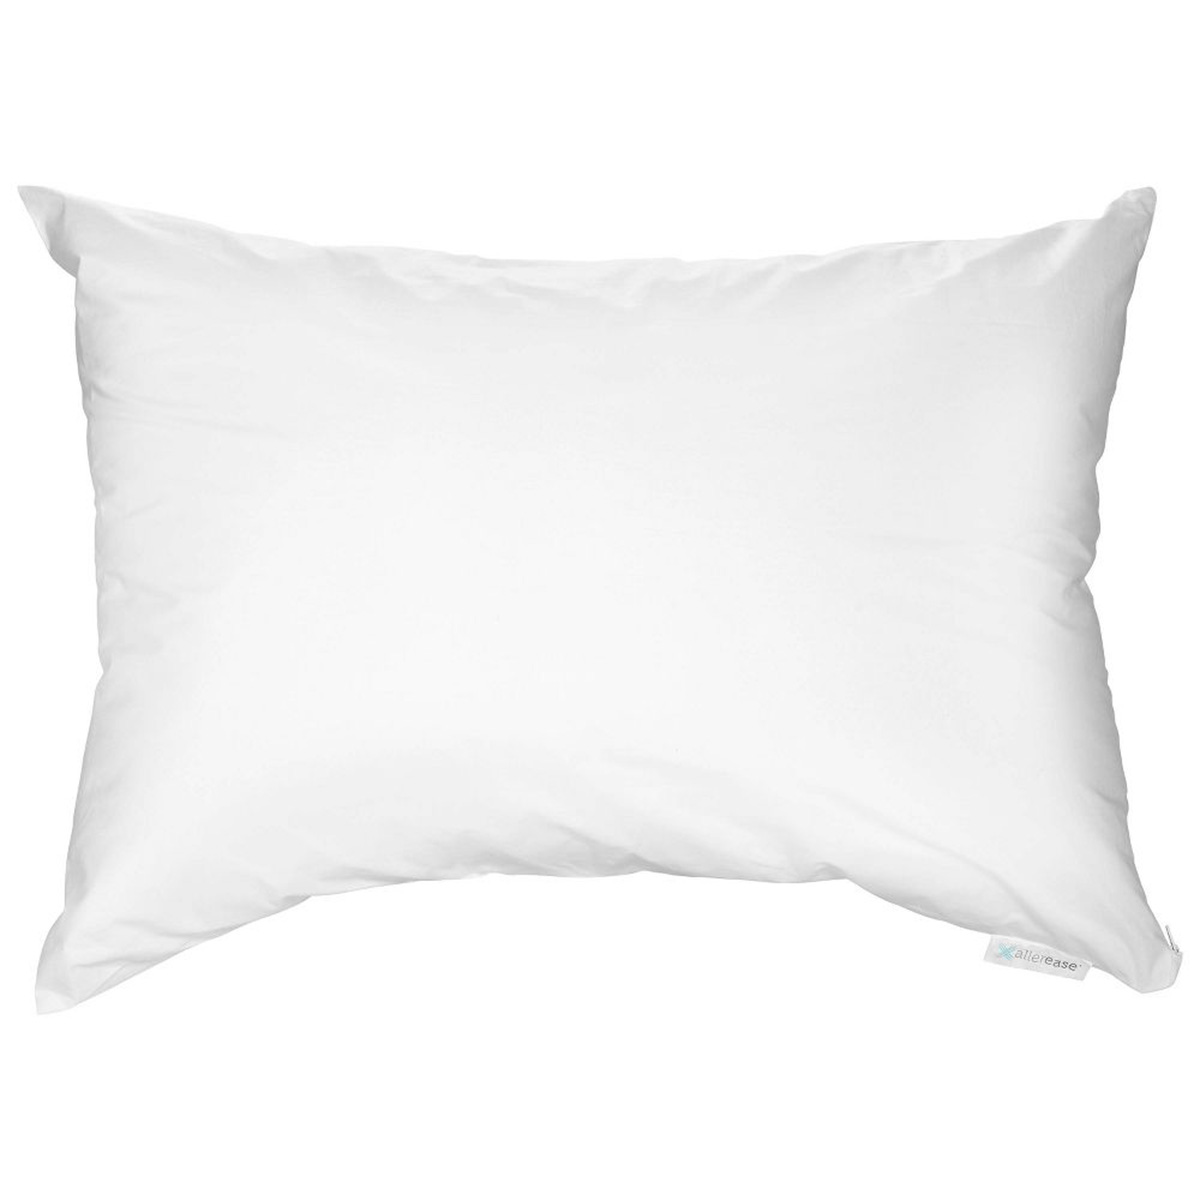 Allerease Ultimate Cotton Pillow Cover